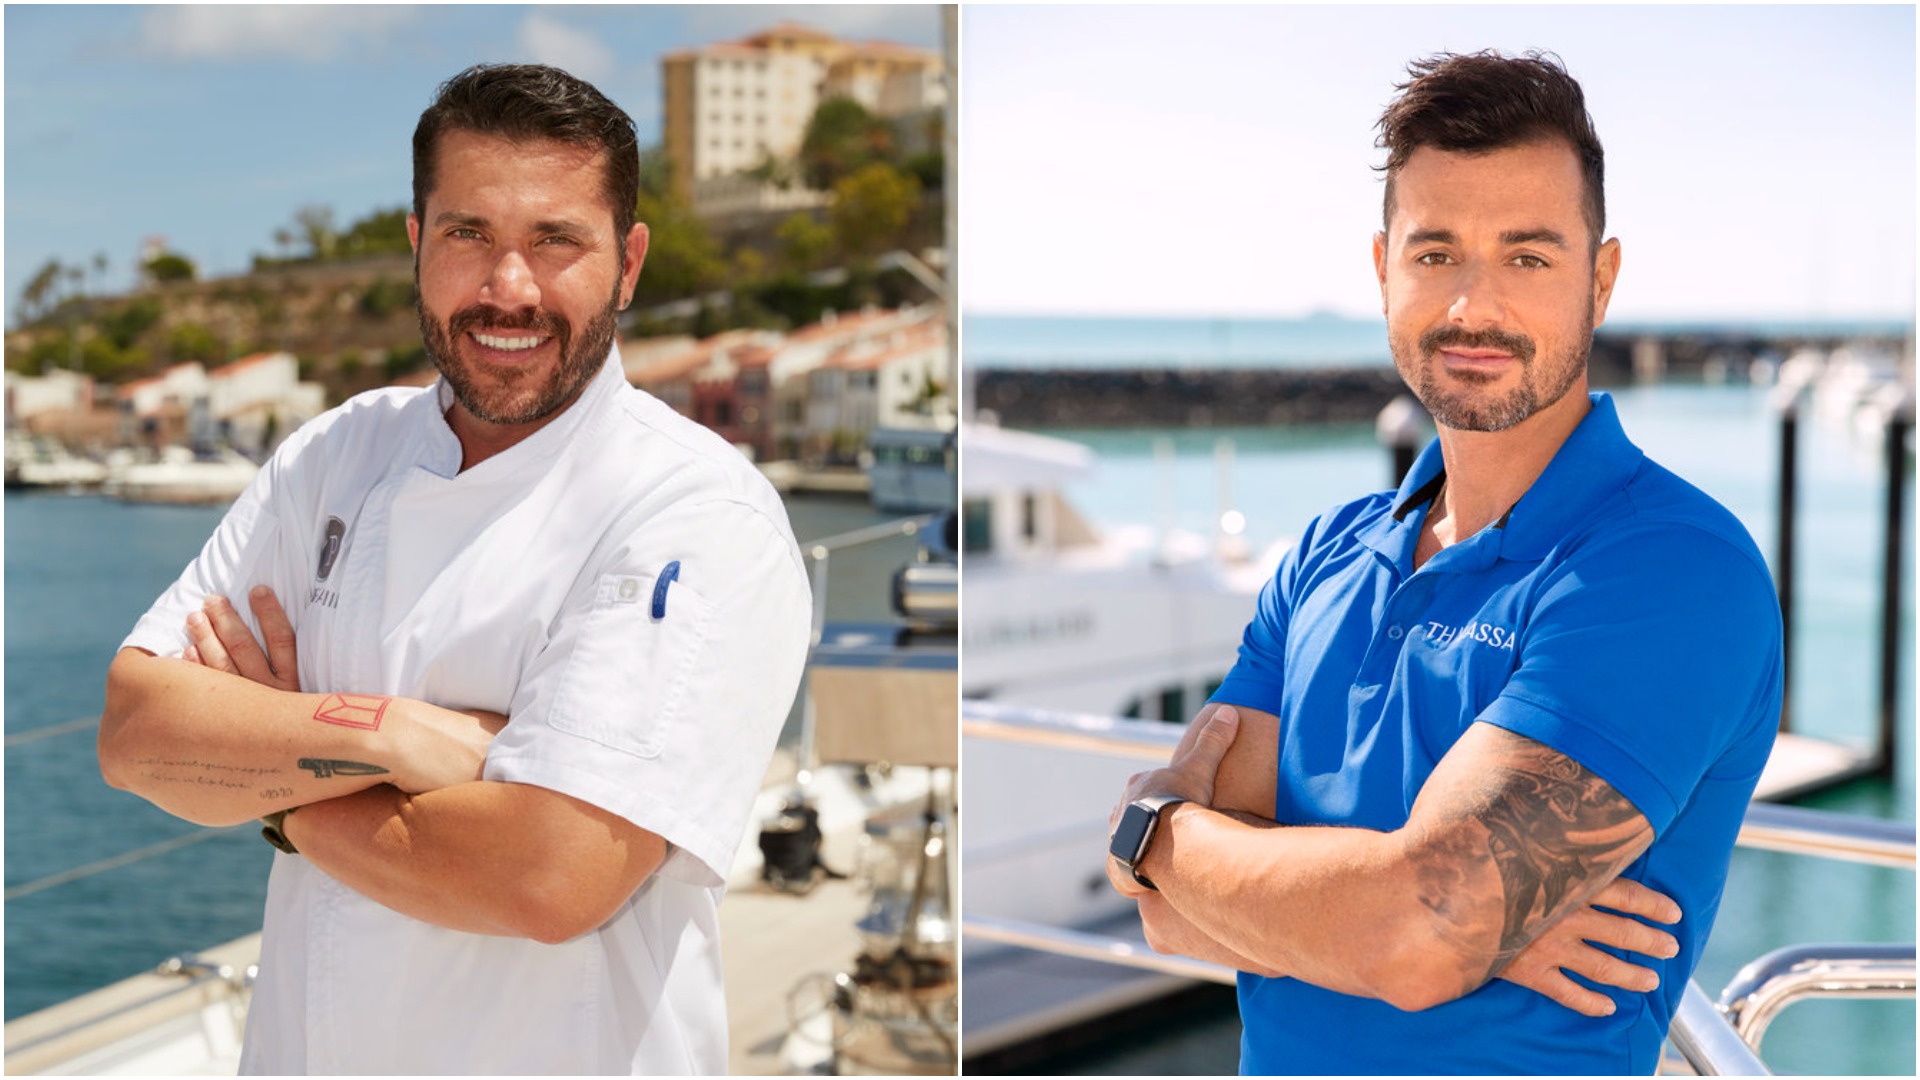 Chef Marcos From ‘Below Deck Sailing Yacht’ Worked Like Crazy on No Sleep – Jamie Sayed Exclusive Interview